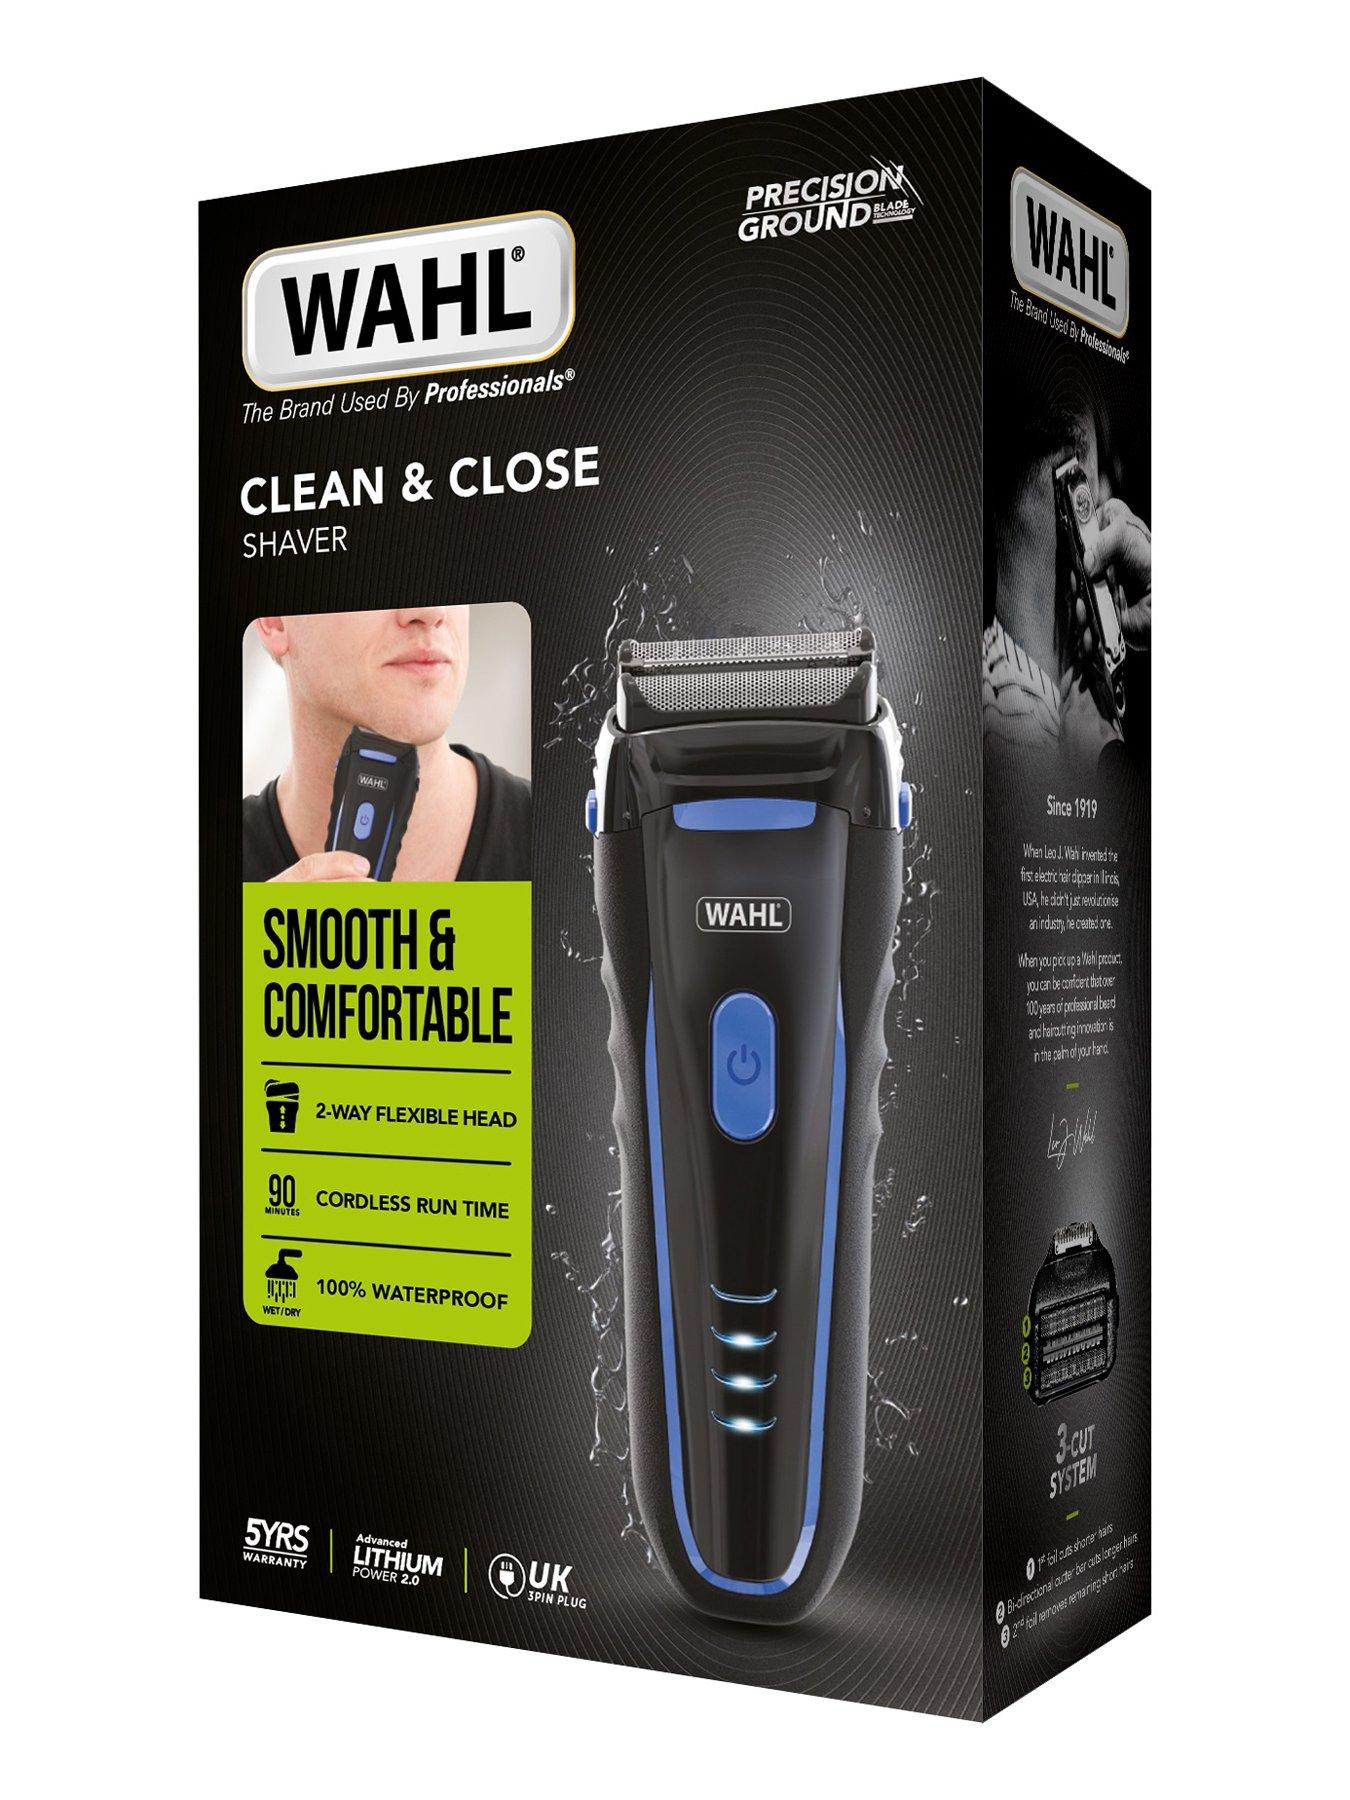 Braun Series 7 70-N1200s Electric Shaver for Men with Precision